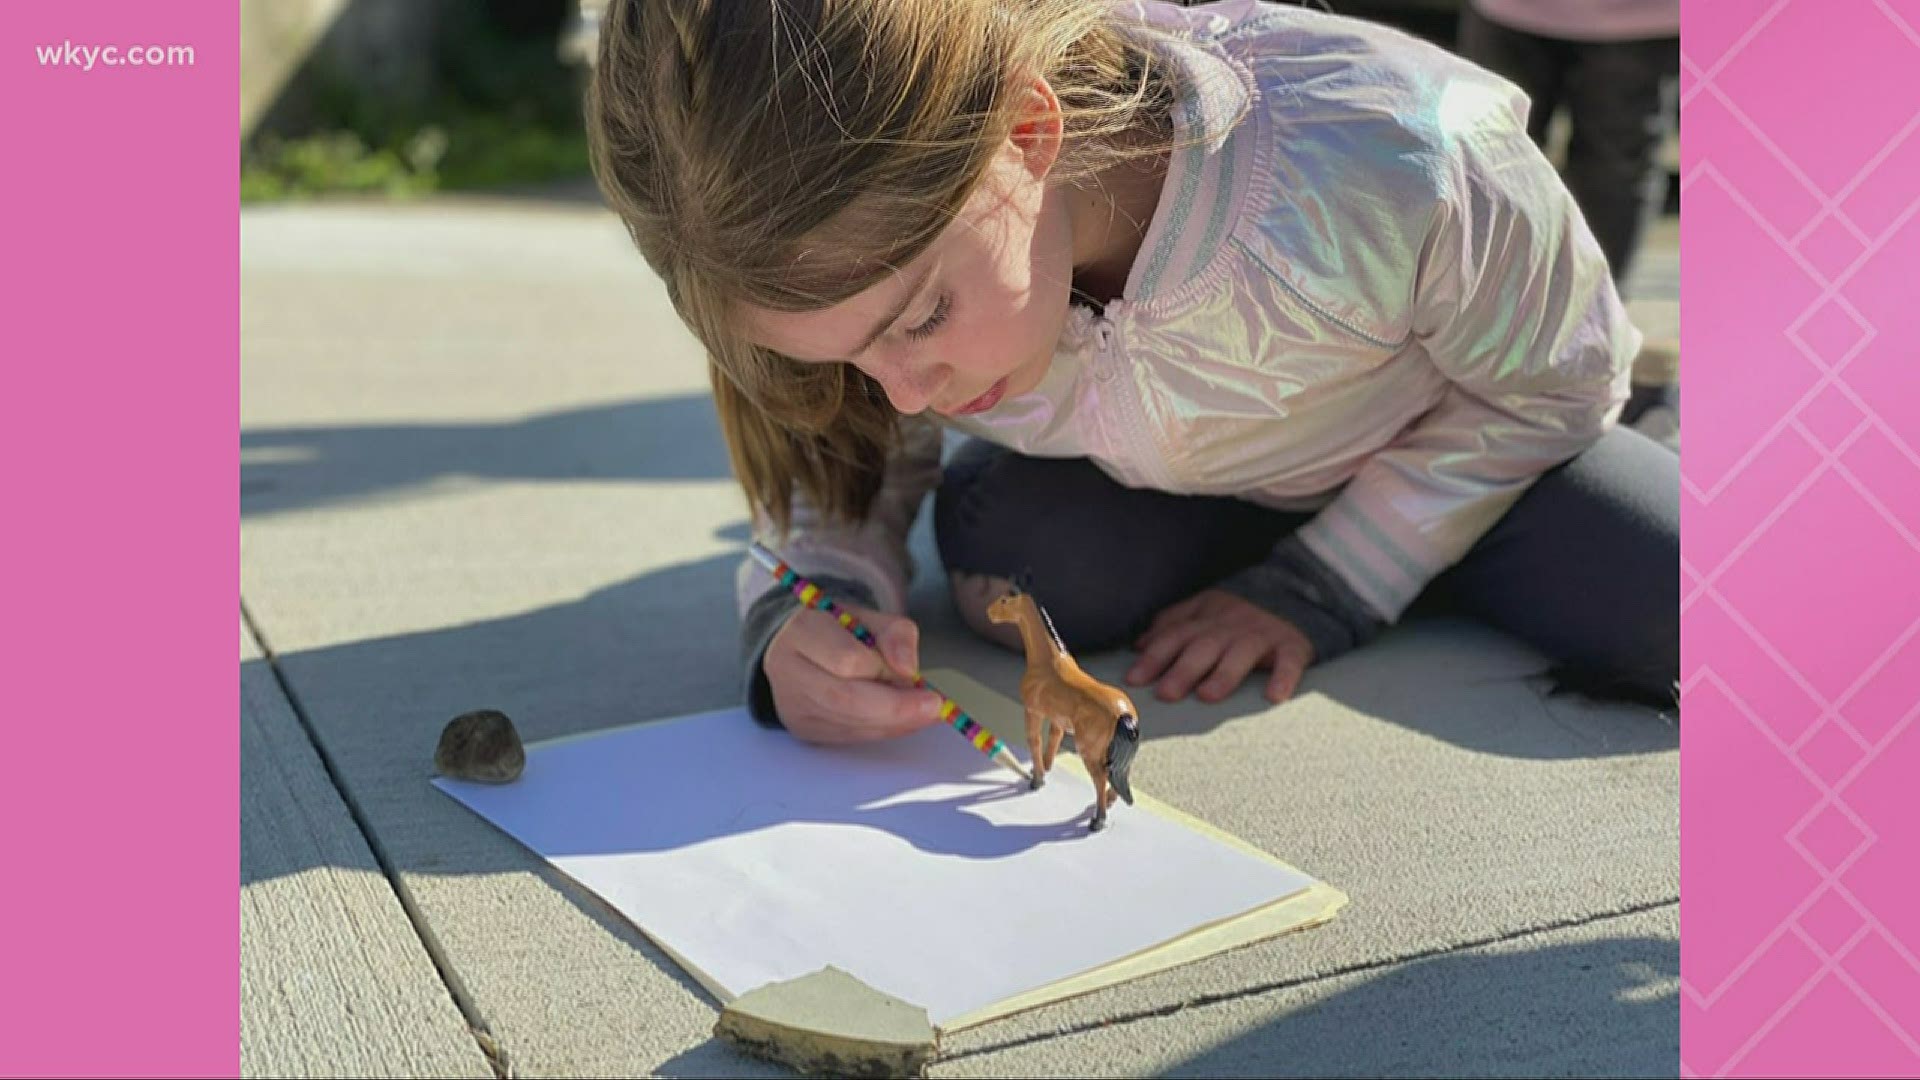 Sidewalk chalk is fun, but there’s another way to draw outside on a nice day. Maureen Kyle shows us how to make a game and a lesson out of shadow drawing.